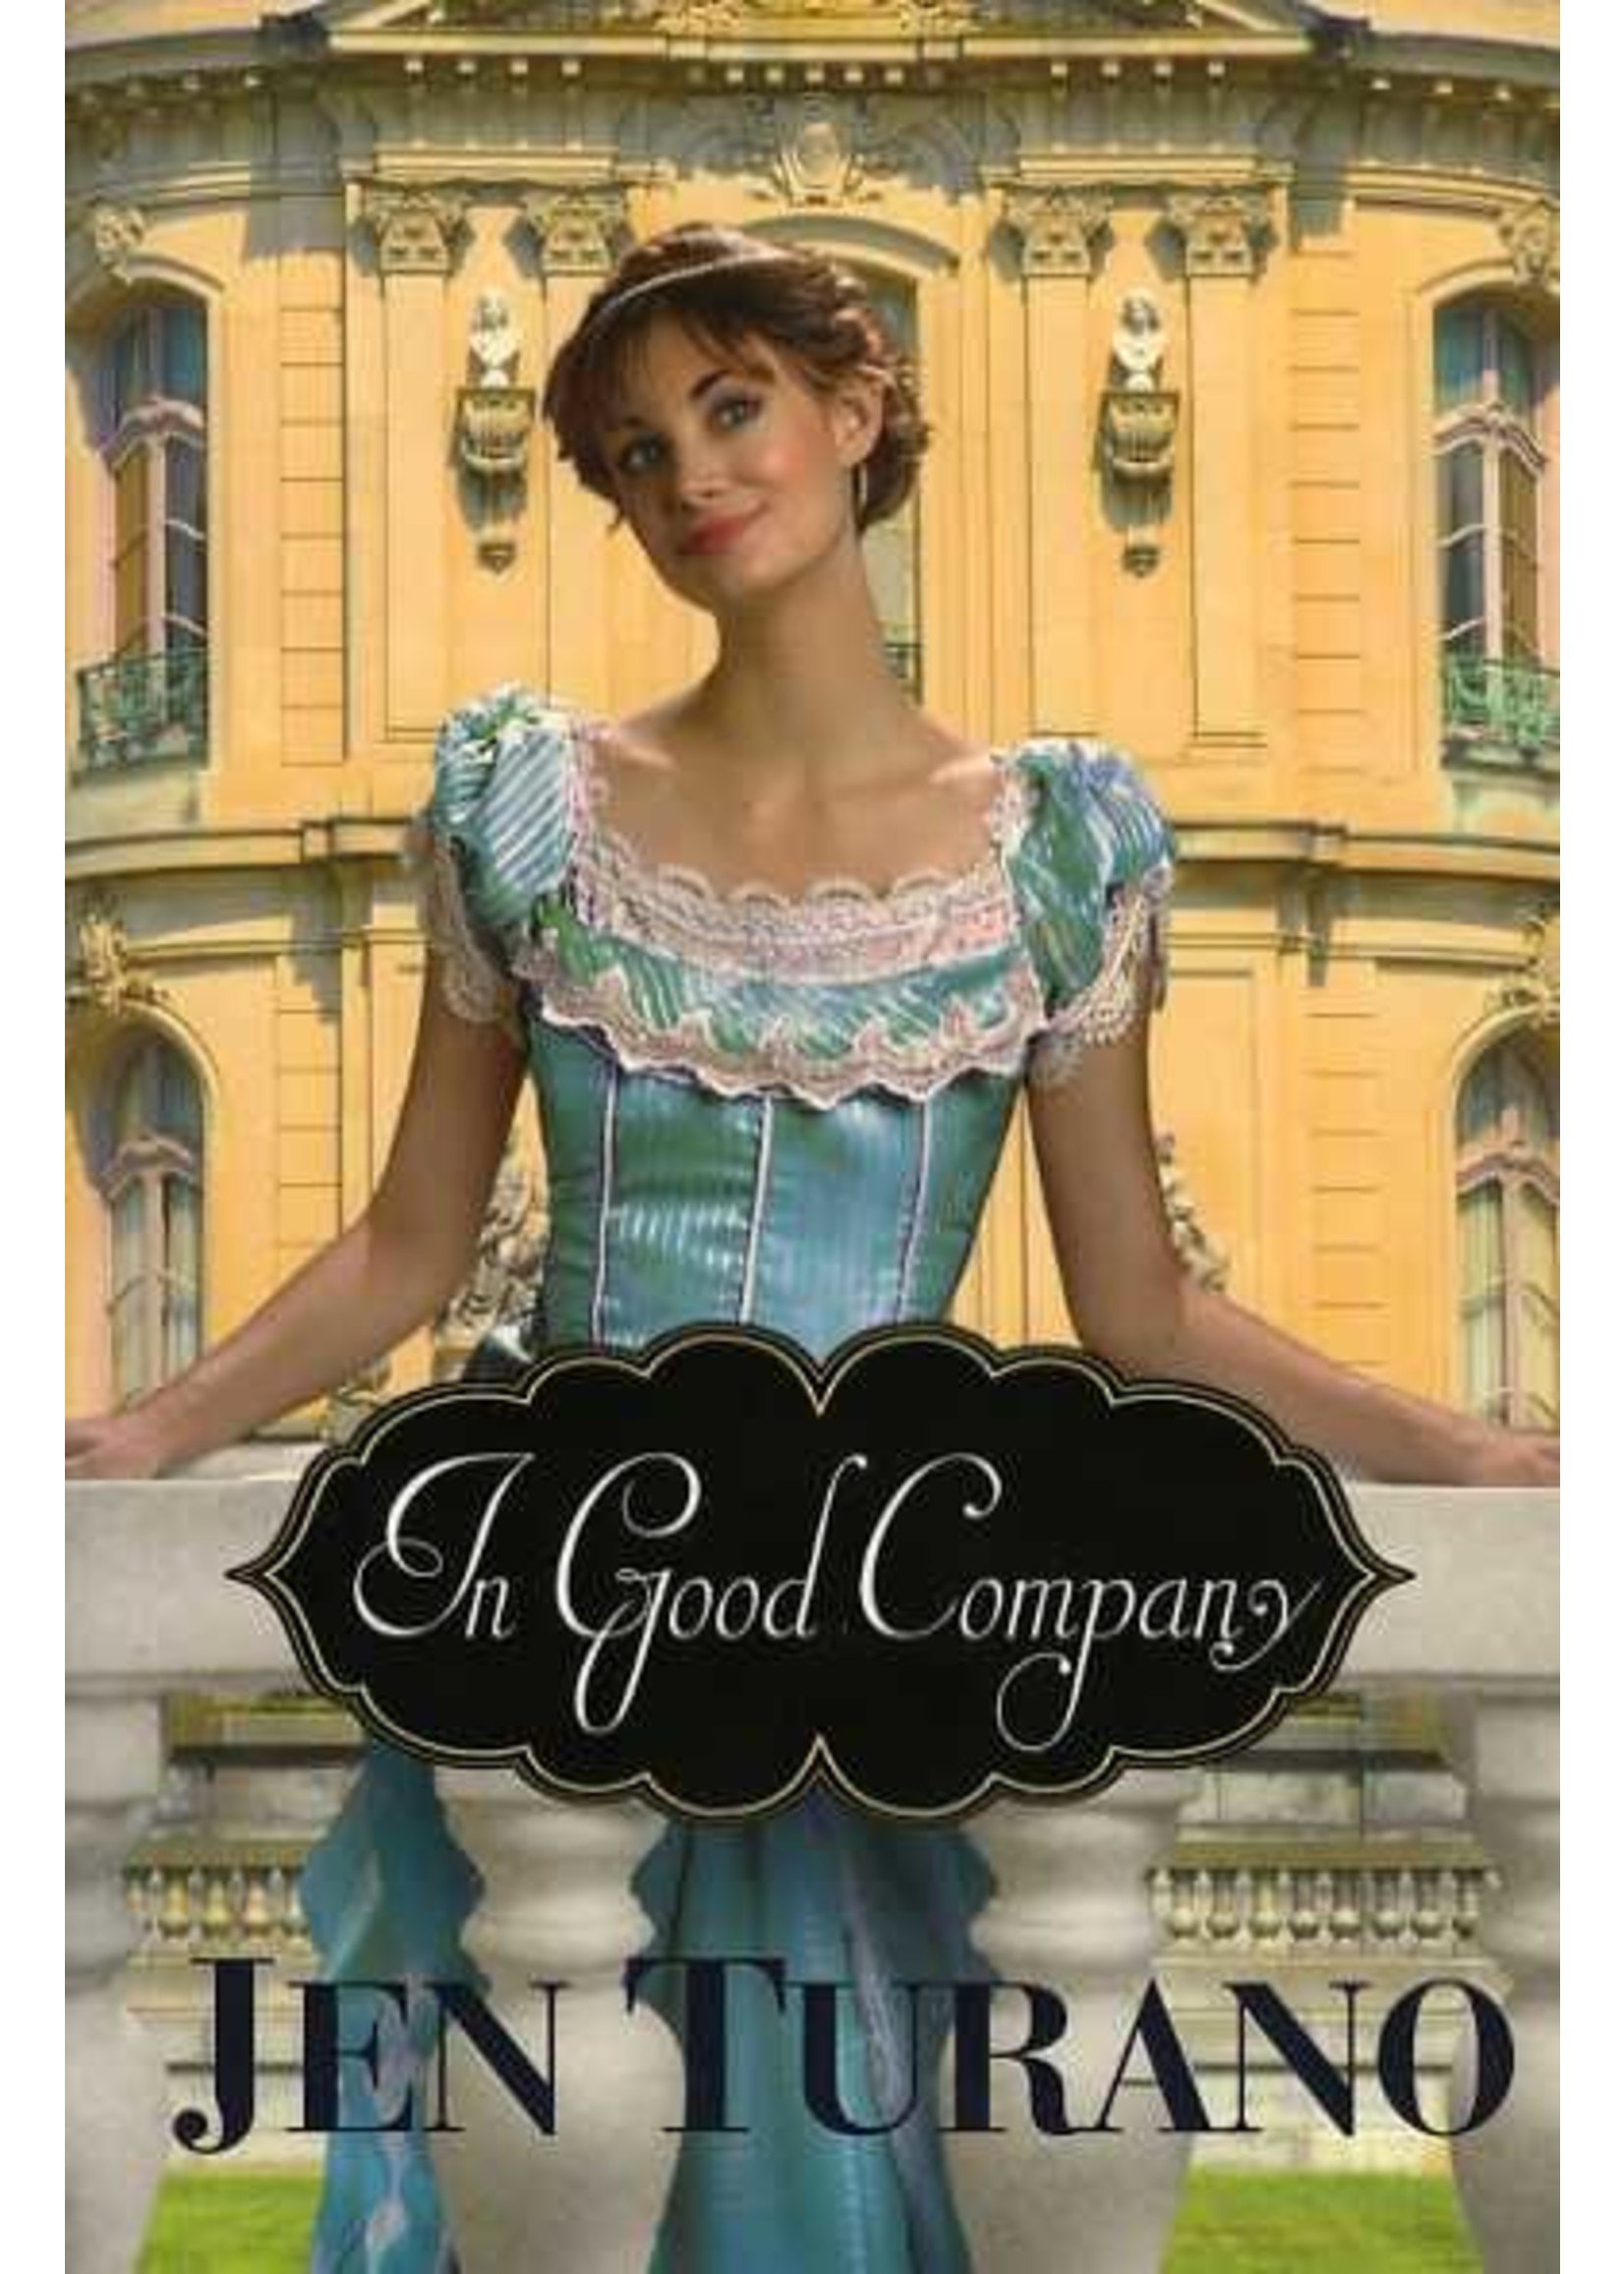 Bethany House In Good Company (A Class of Their Own 2) - Jen Turano